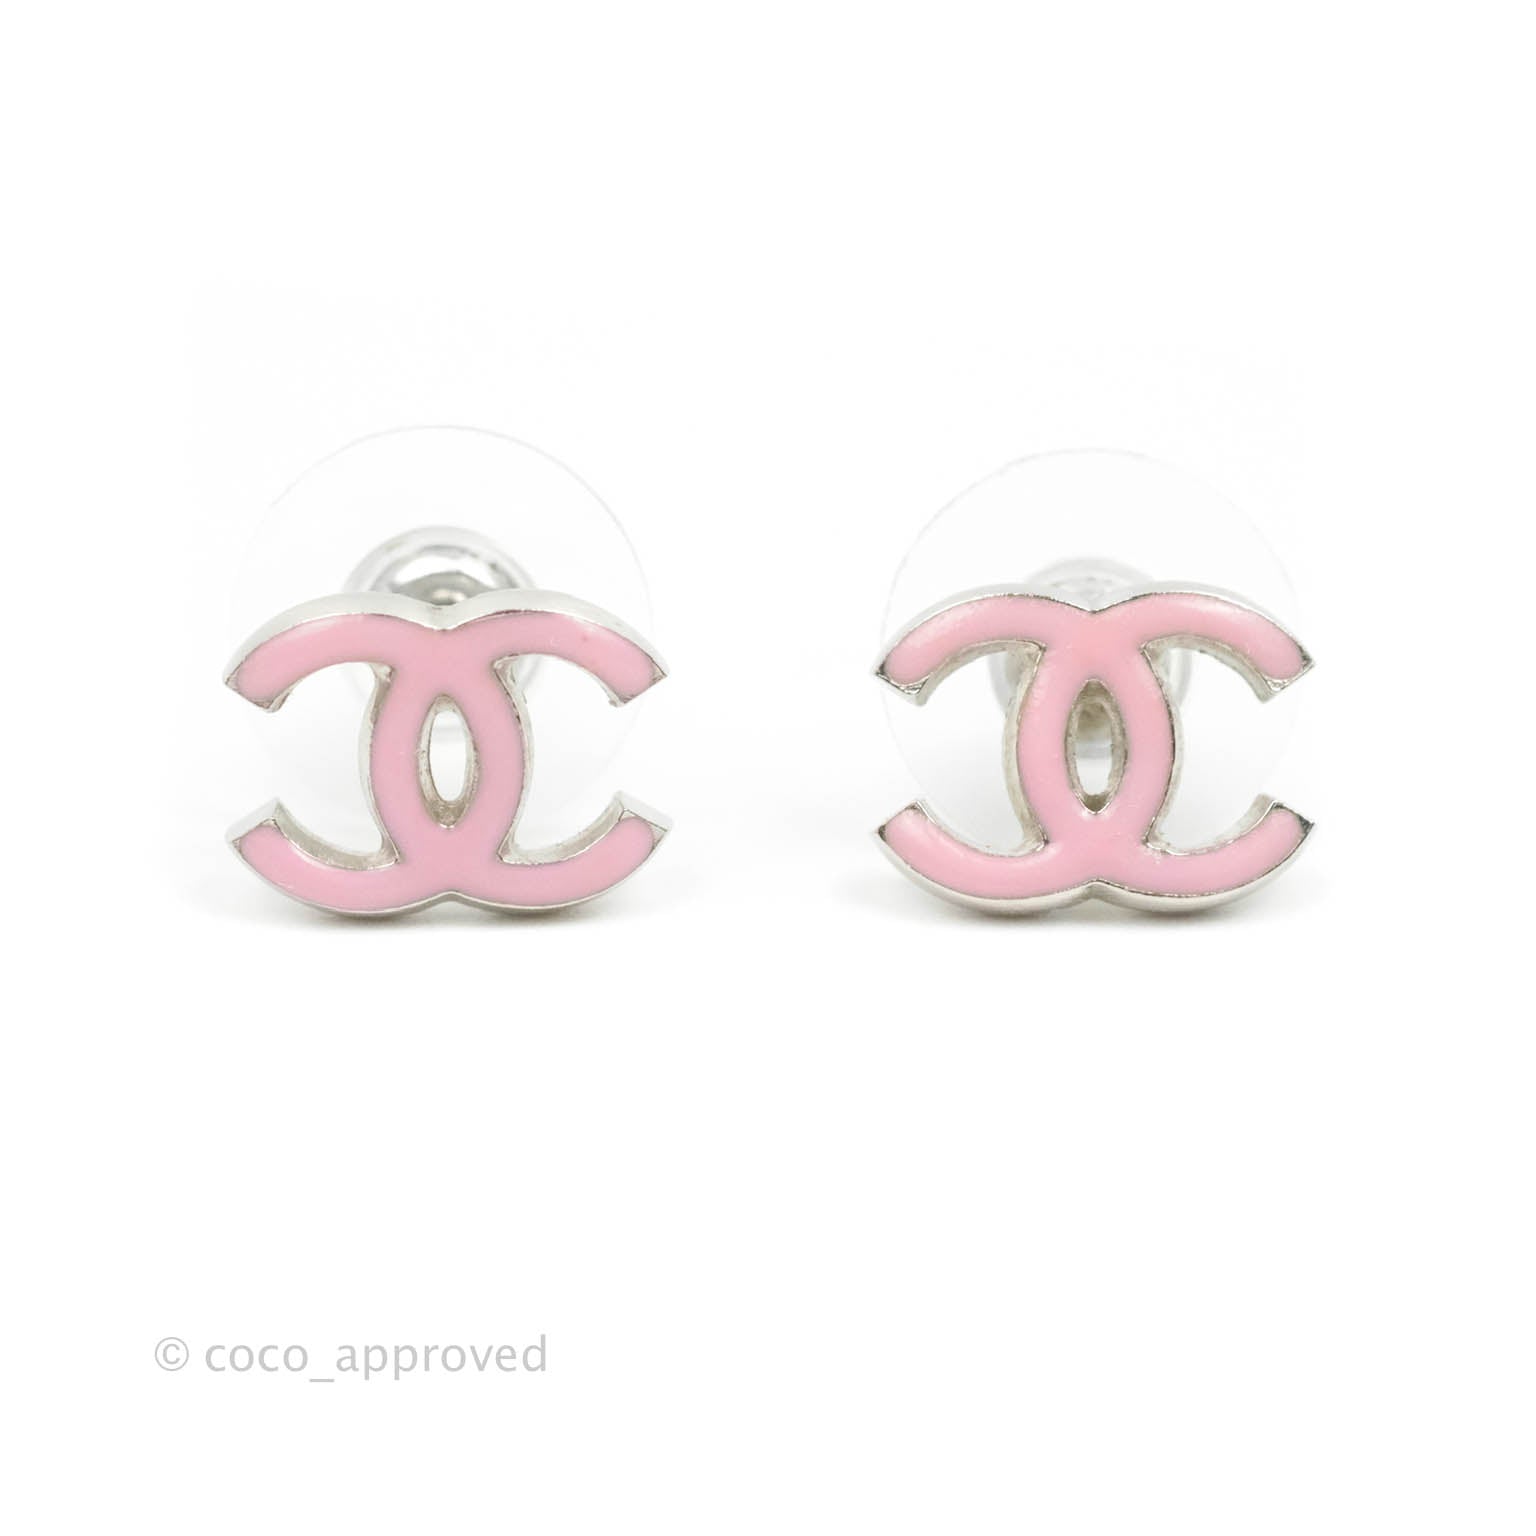 CHANEL Vintage Ear Clips With Mother-of-pearl Bottom and 